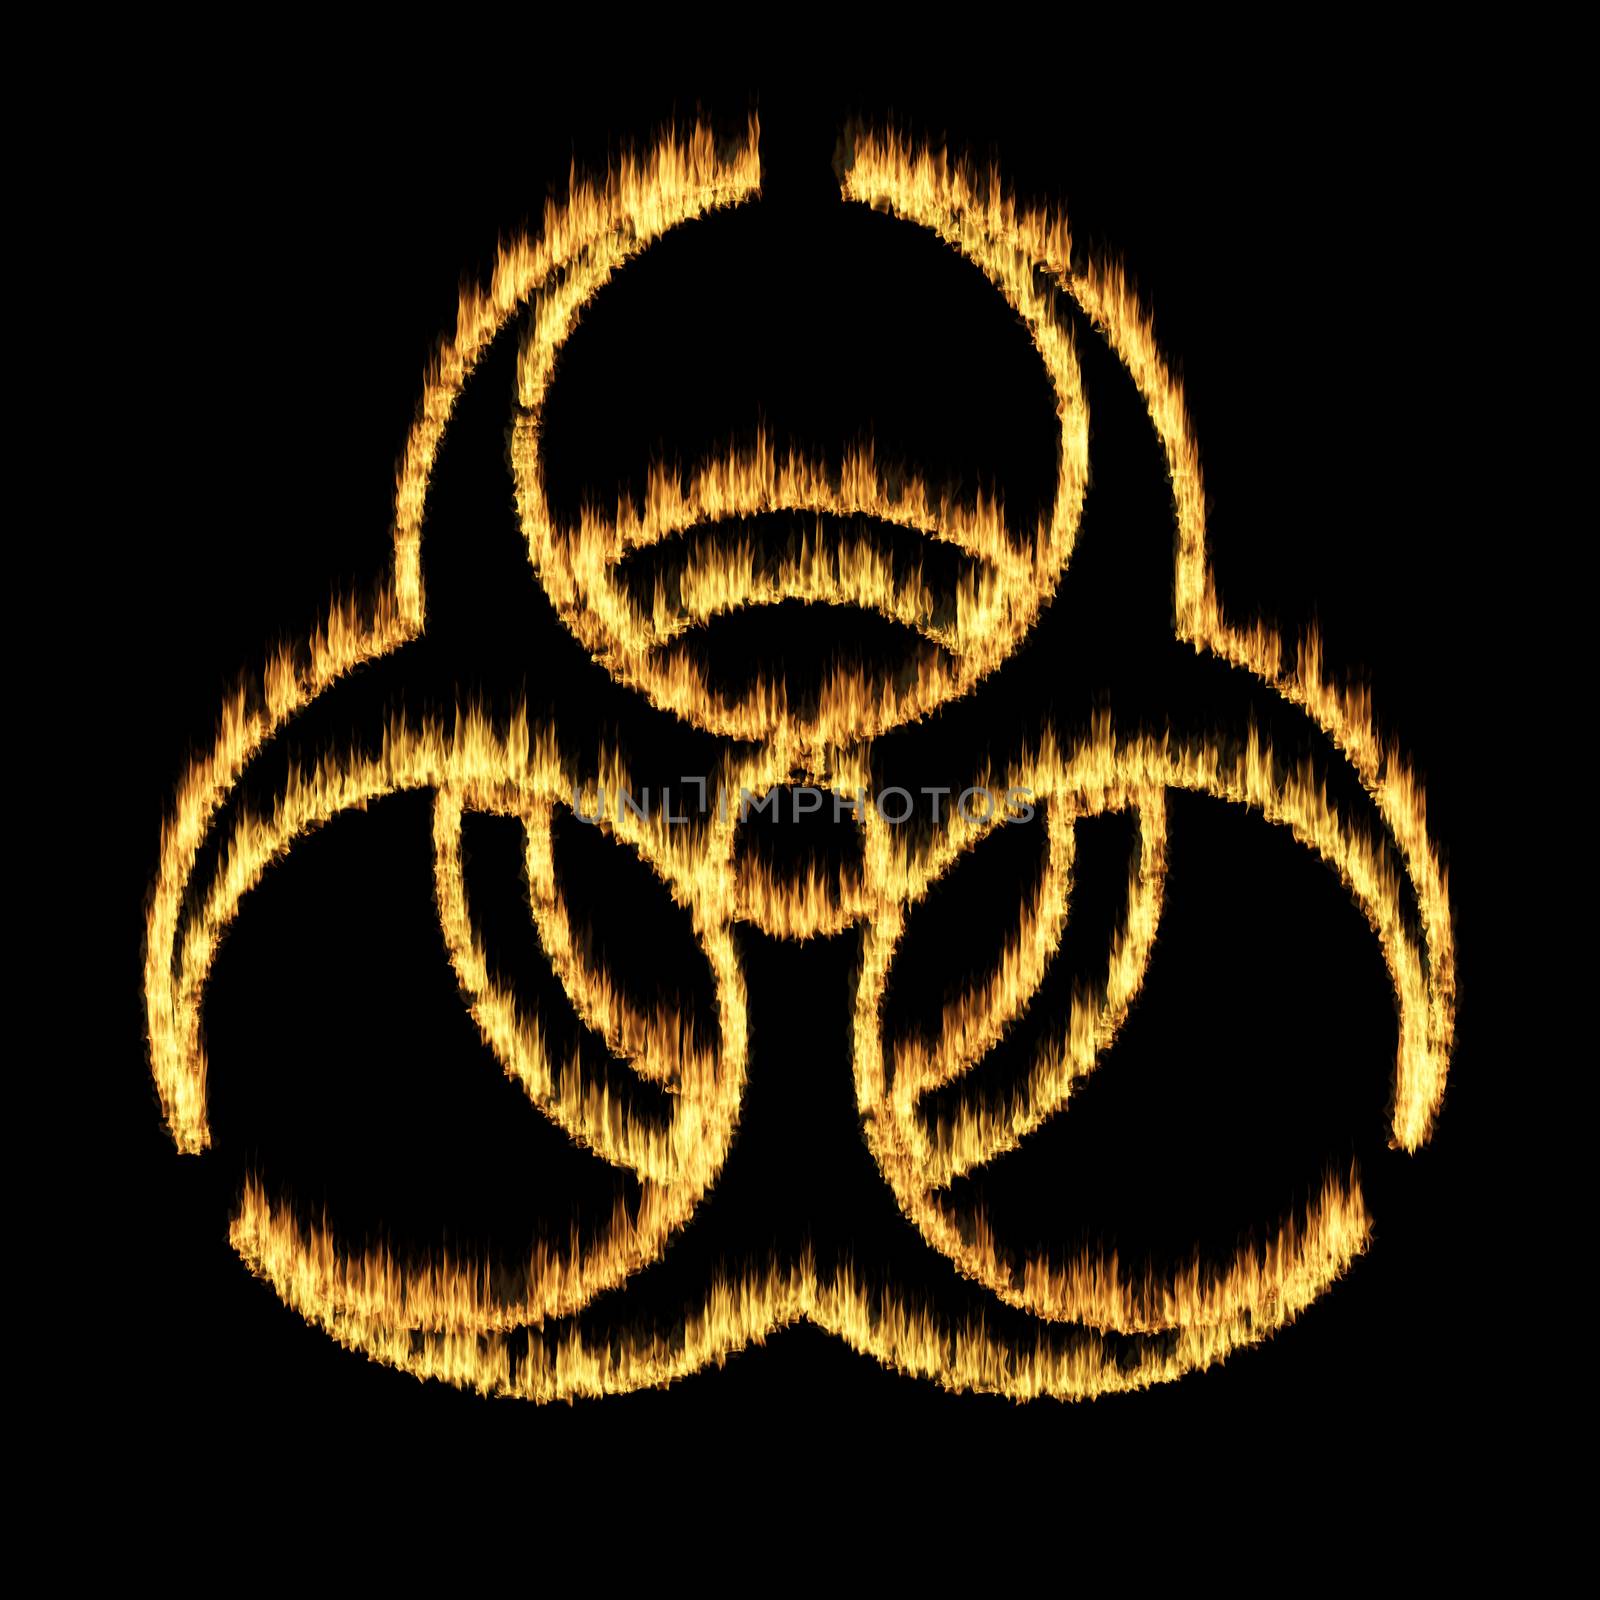 Warning symbol of a biohazard sign from flames - abstract illustration